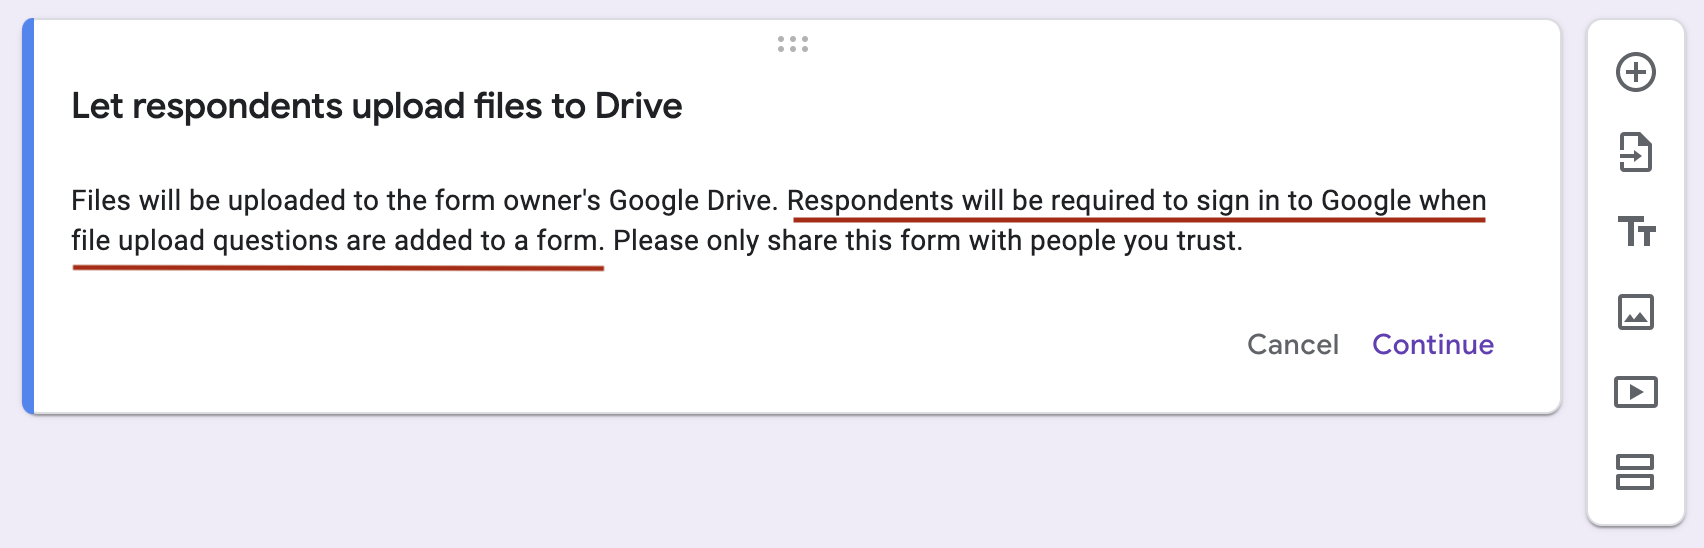 Google intake form with file uploads issues